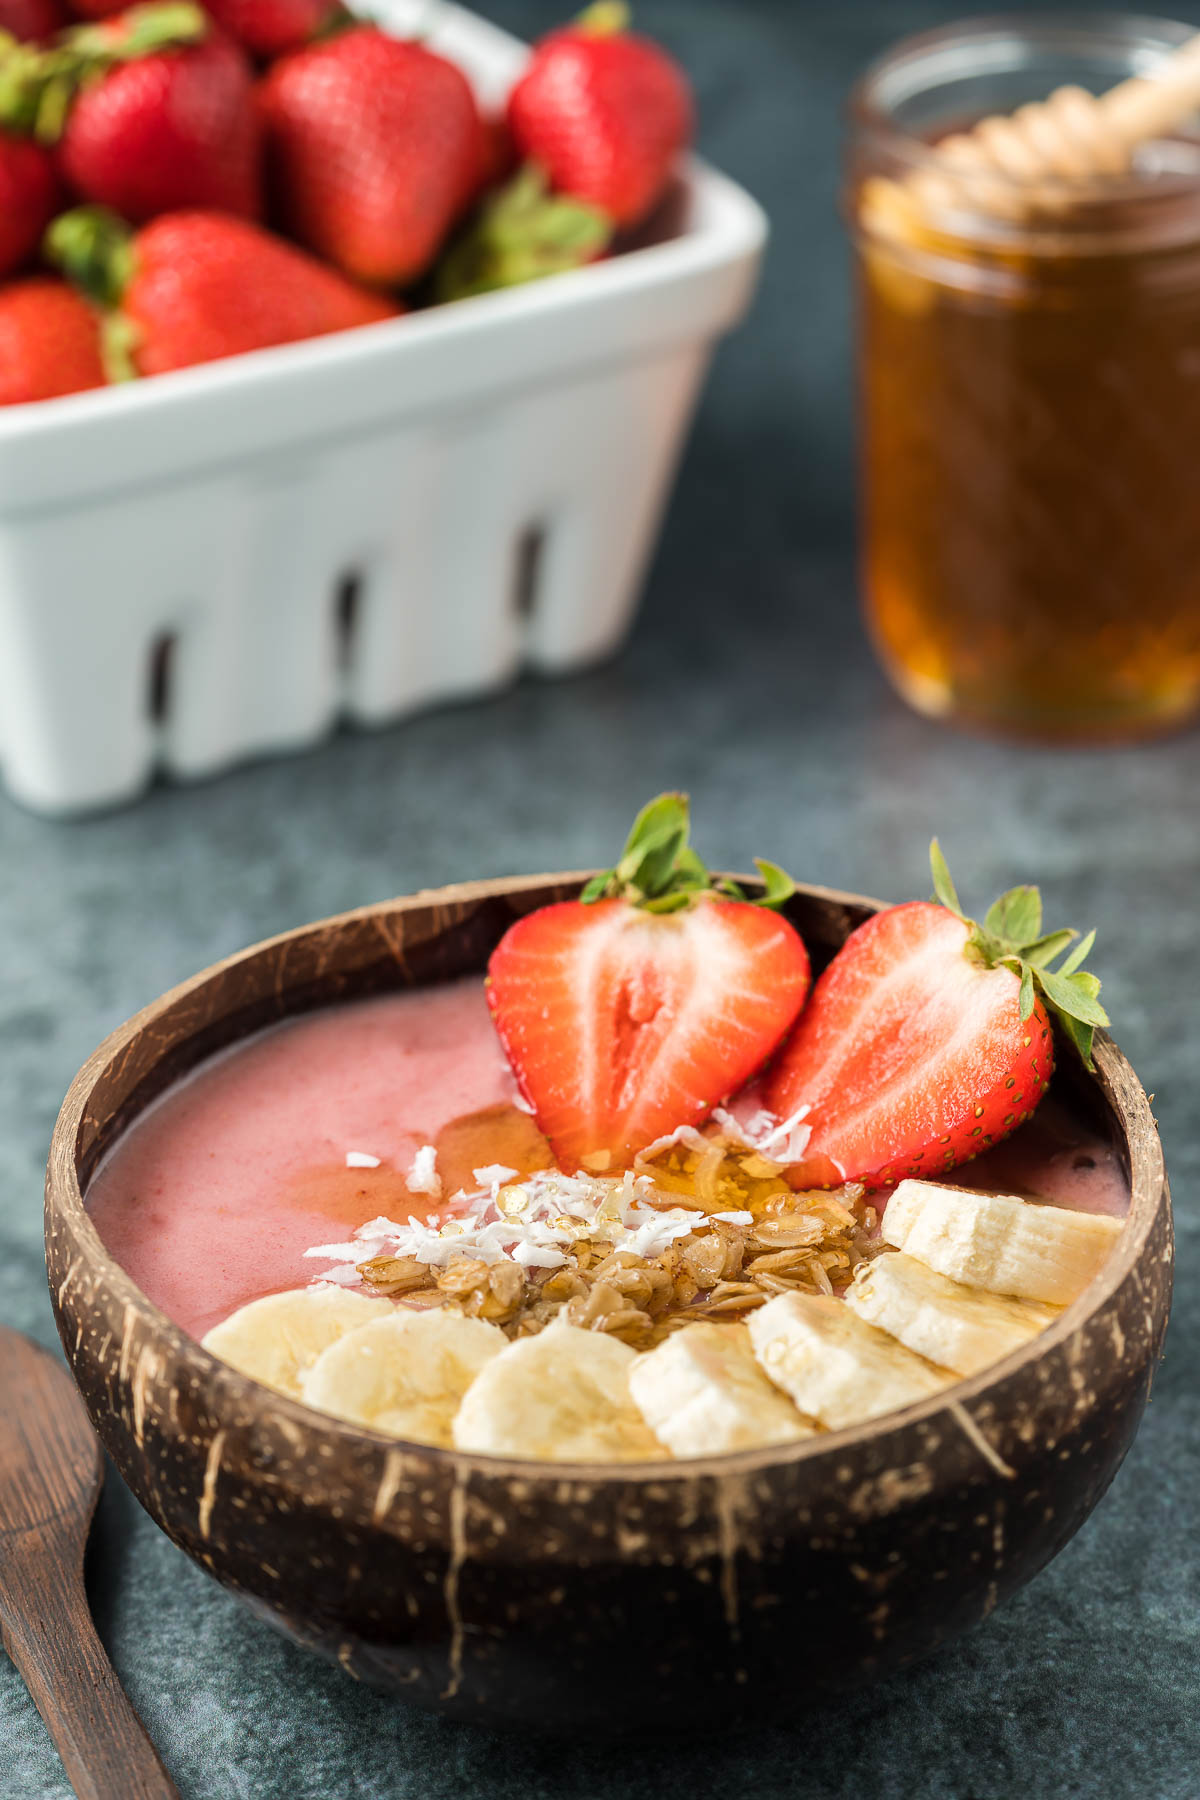 Strawberry banana smoothie bowl with jar of honey and punnet of strawberries